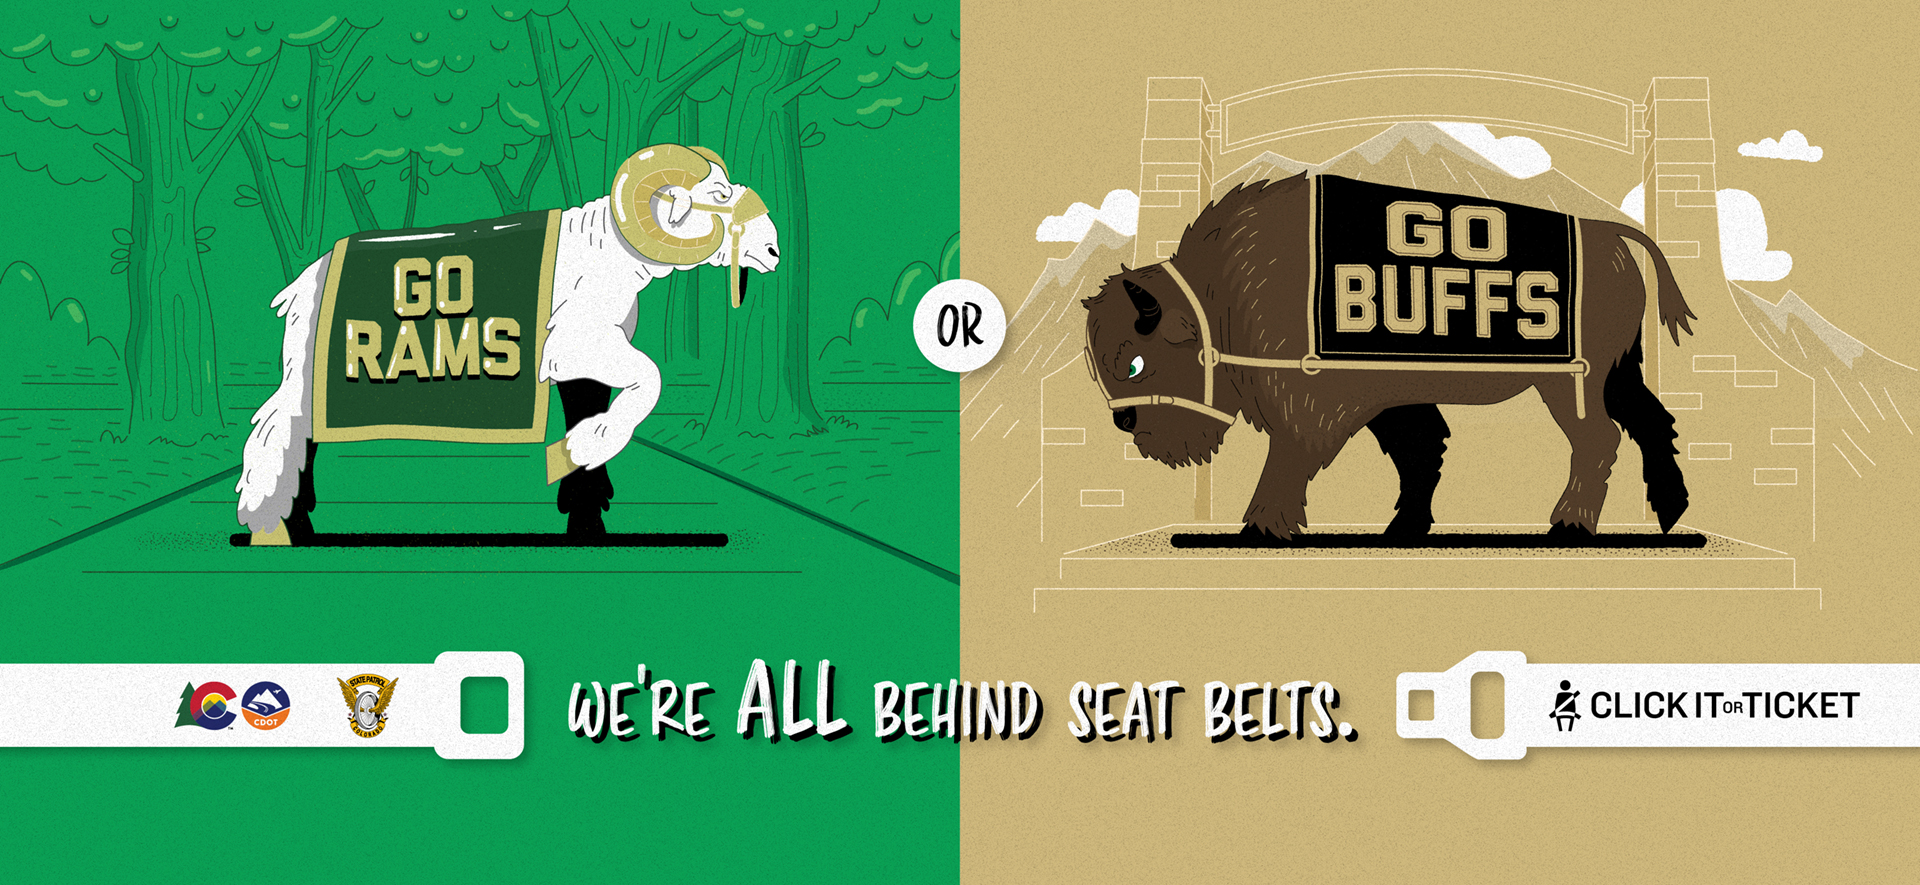 We're All Behind Seat Belts - Mascots detail image